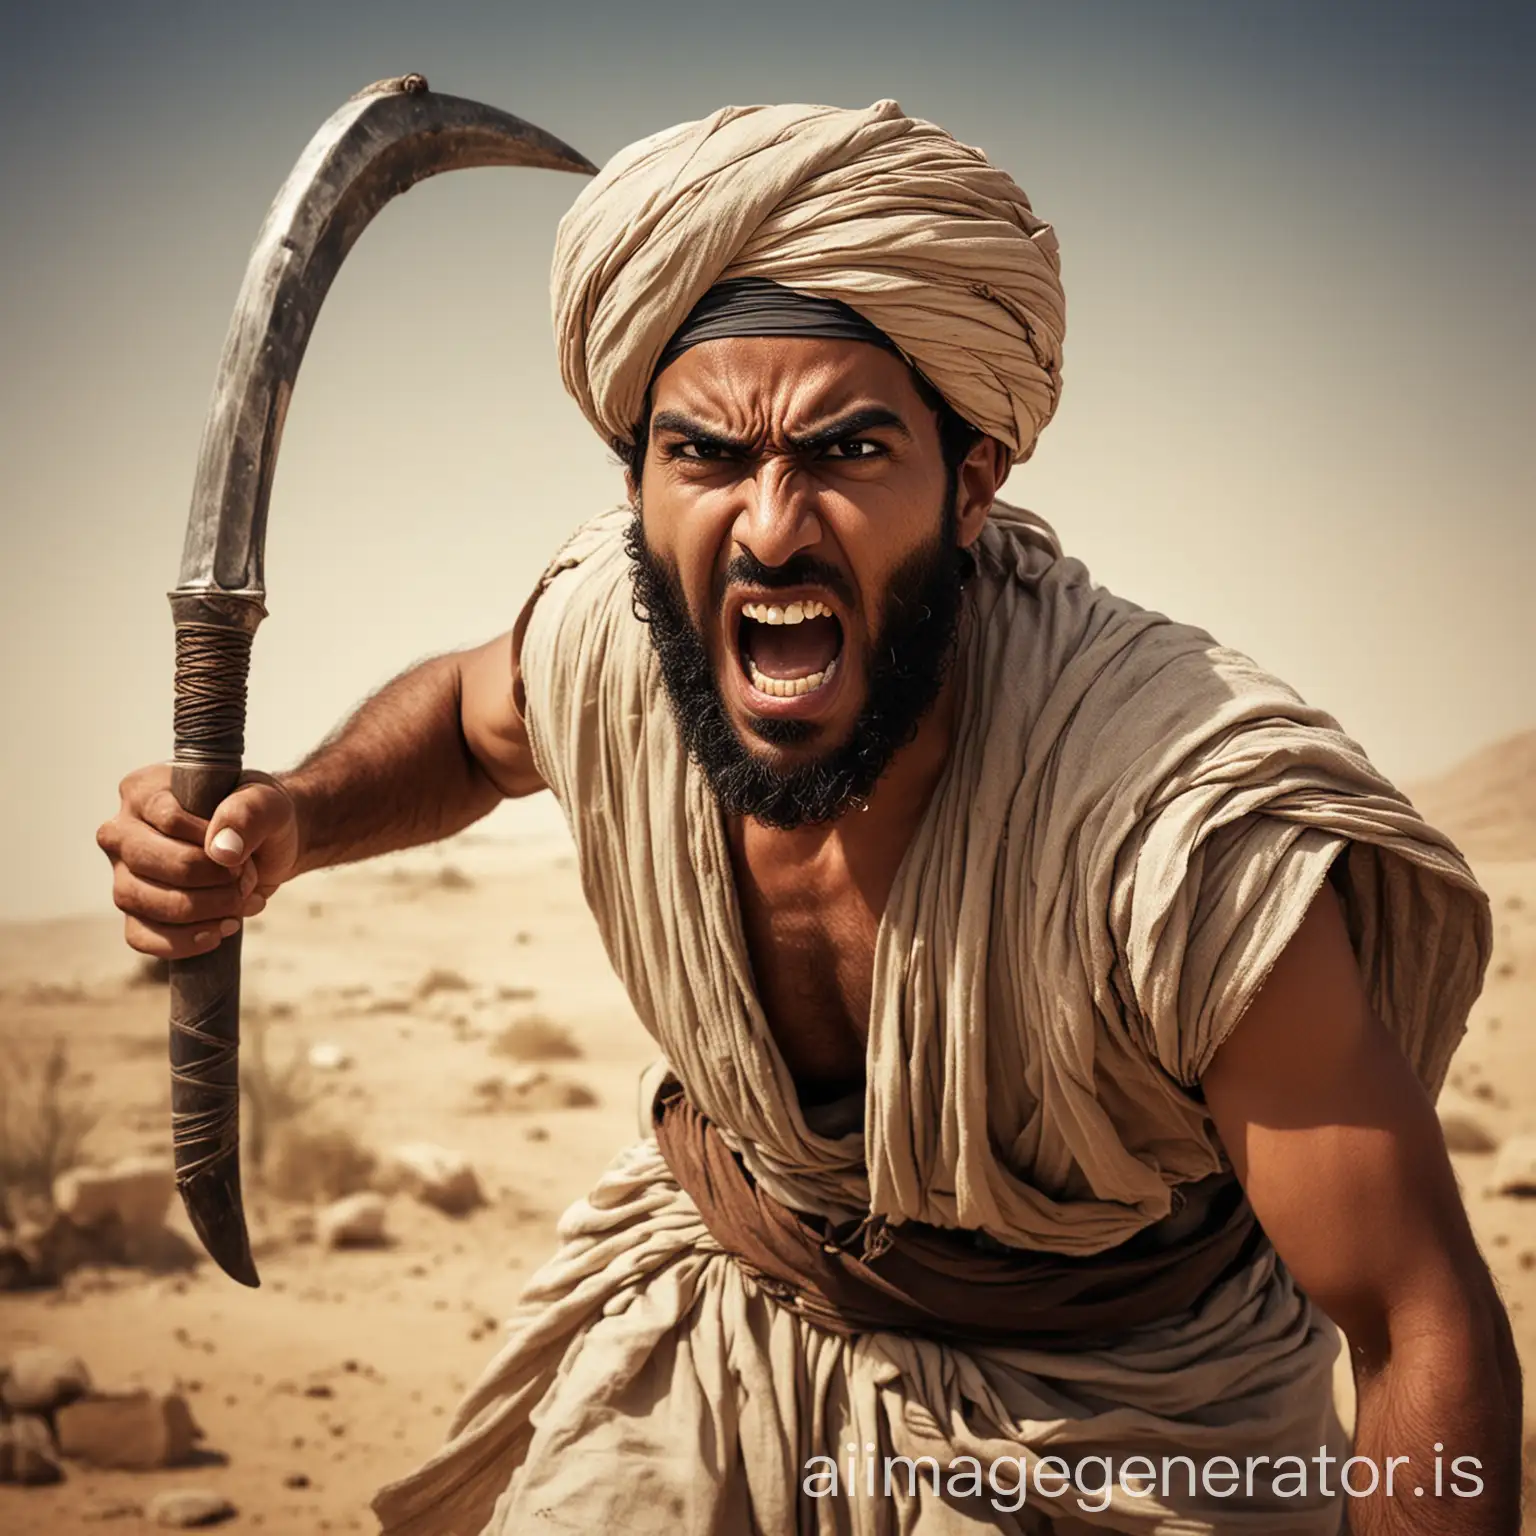 Angry Middle Eastern Man with turban, shouting angrily, carrying a scimitar. 3000 BC.